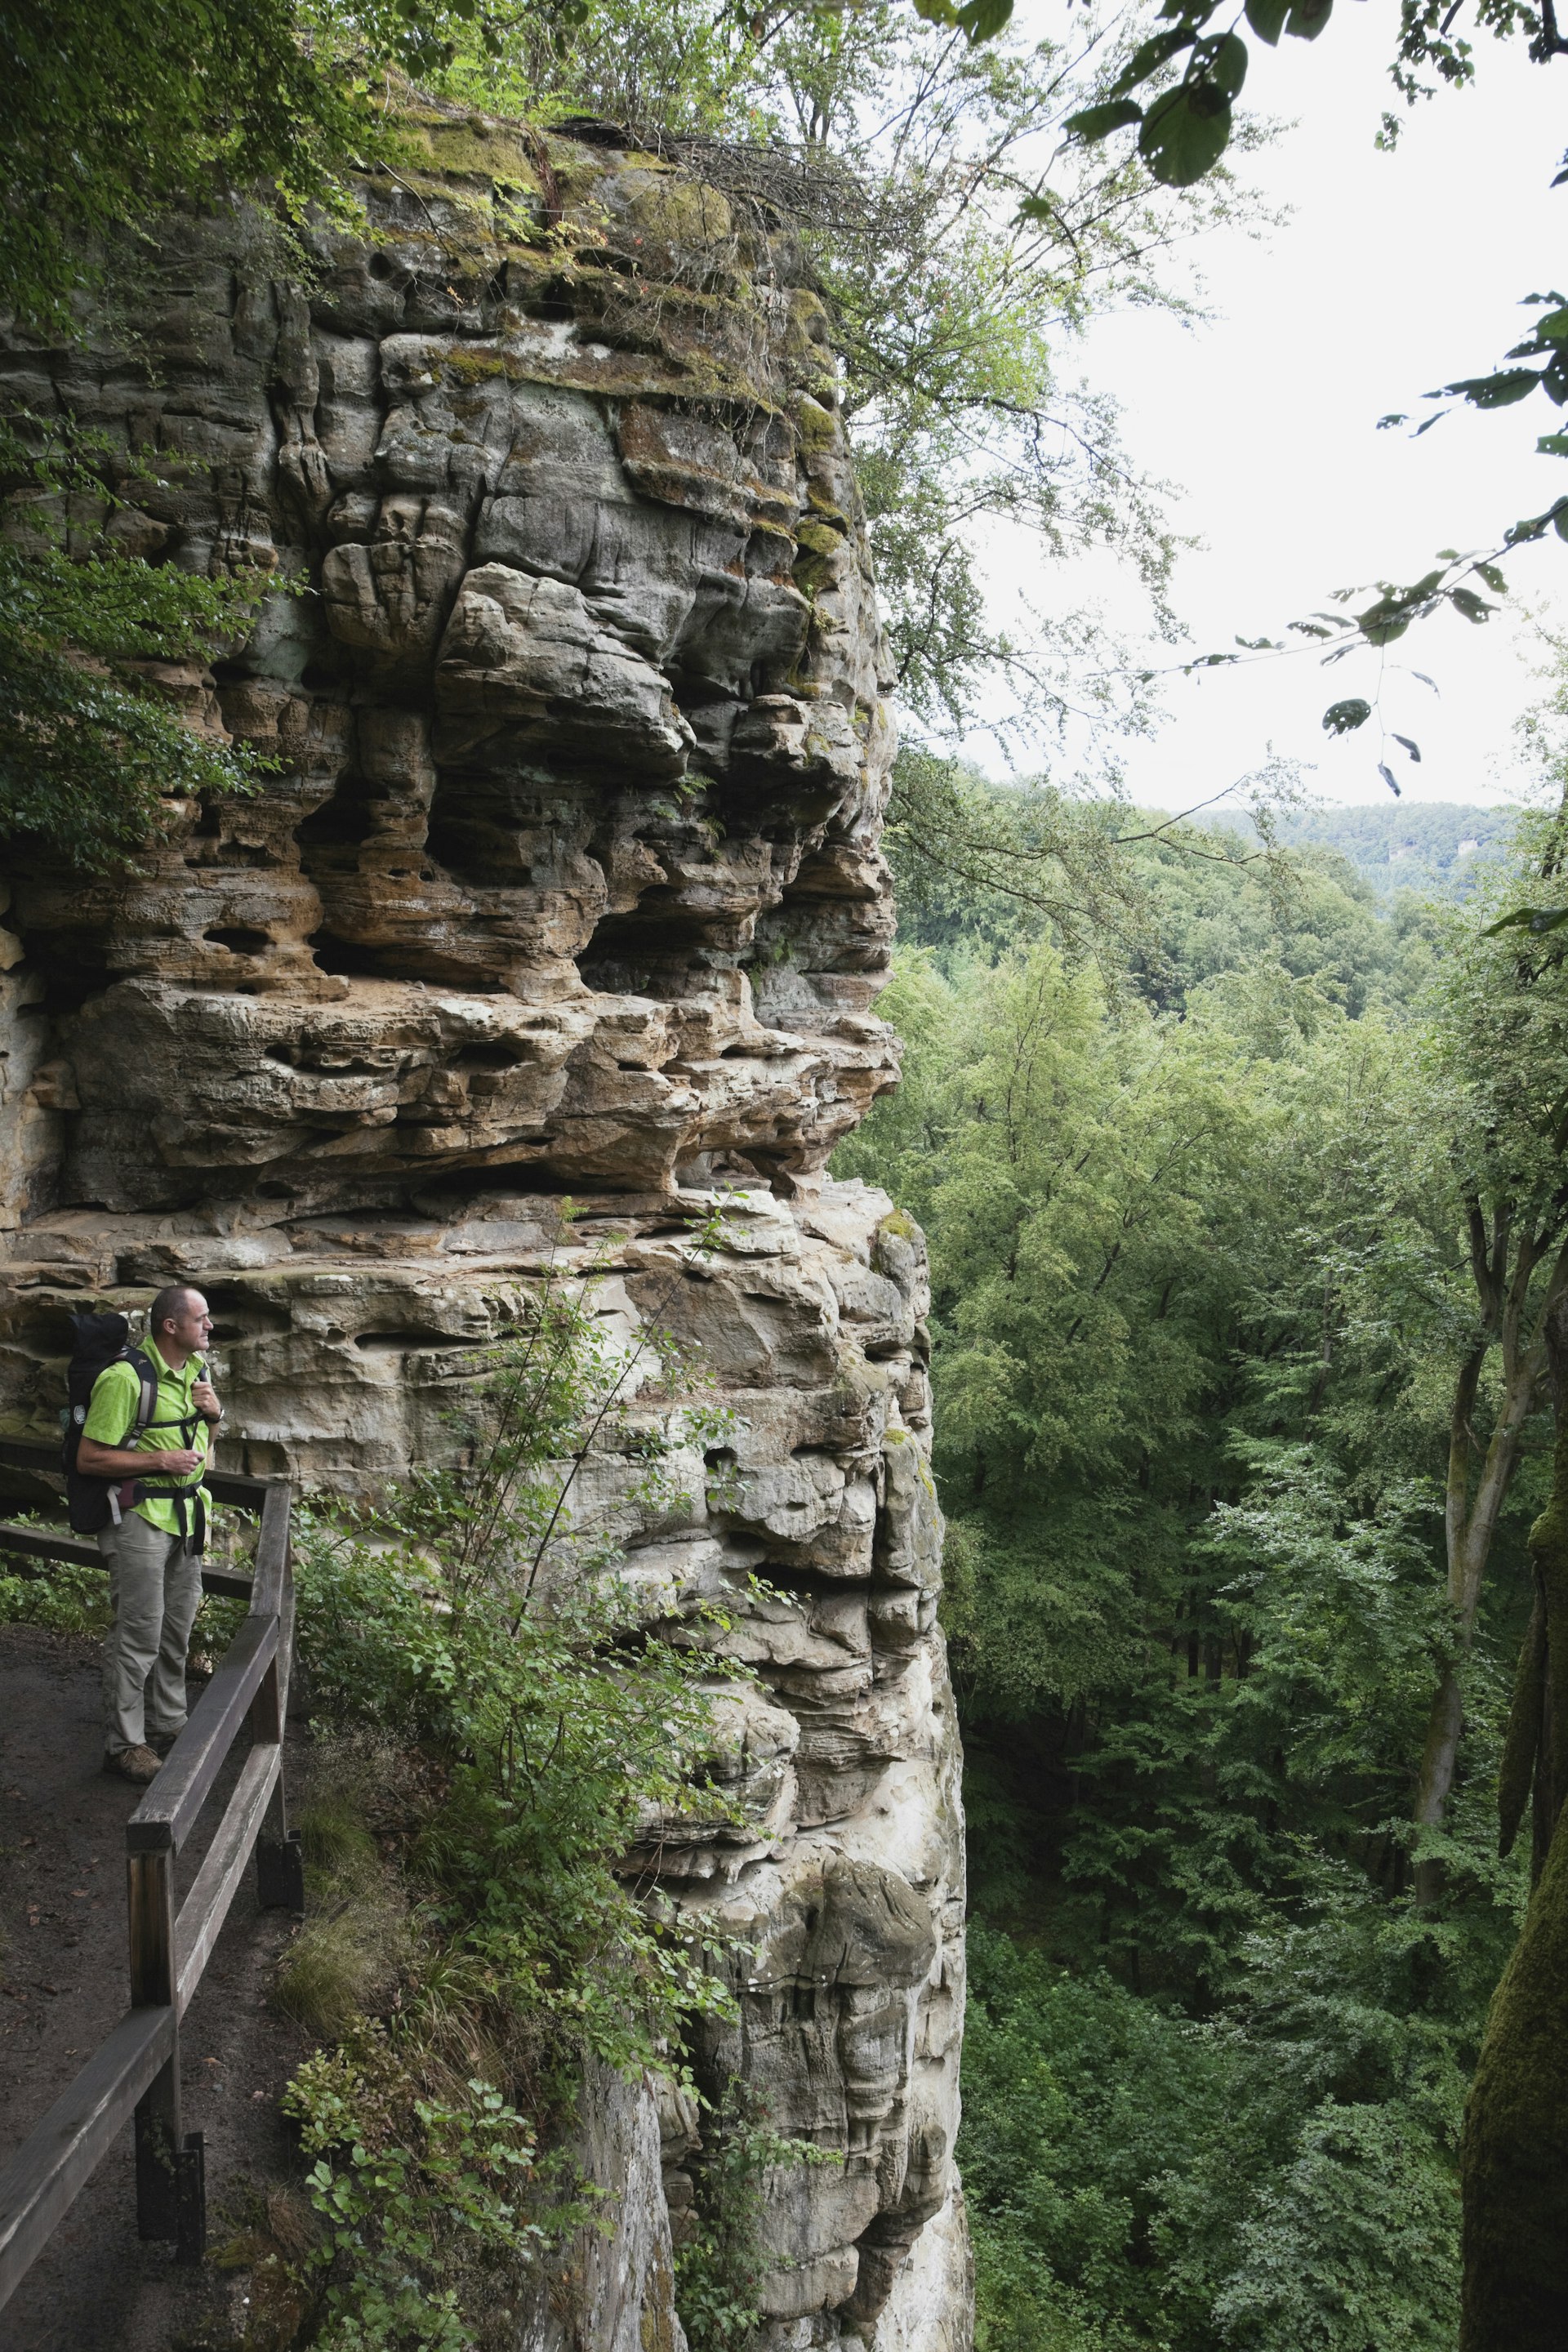 Hiker on a sandstone rock formation in the beech tree foreset of Eifel National Park, Germany